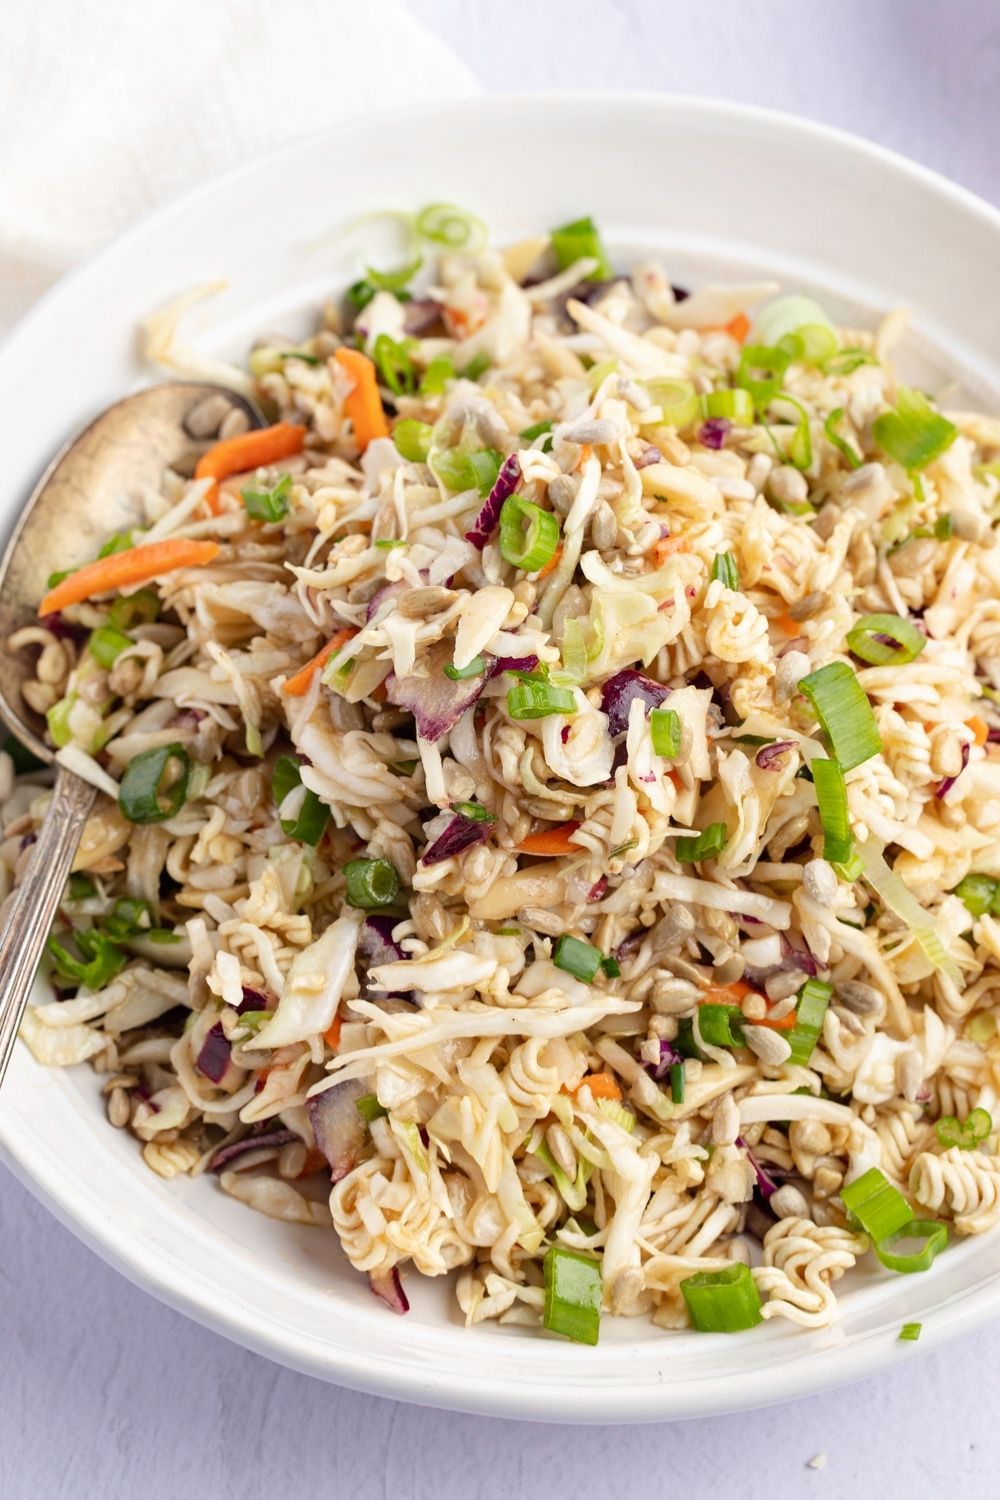 Oriental Coleslaw with Ramen Noodles, Carrots, Red Onions, Green Onions, and Cabbage